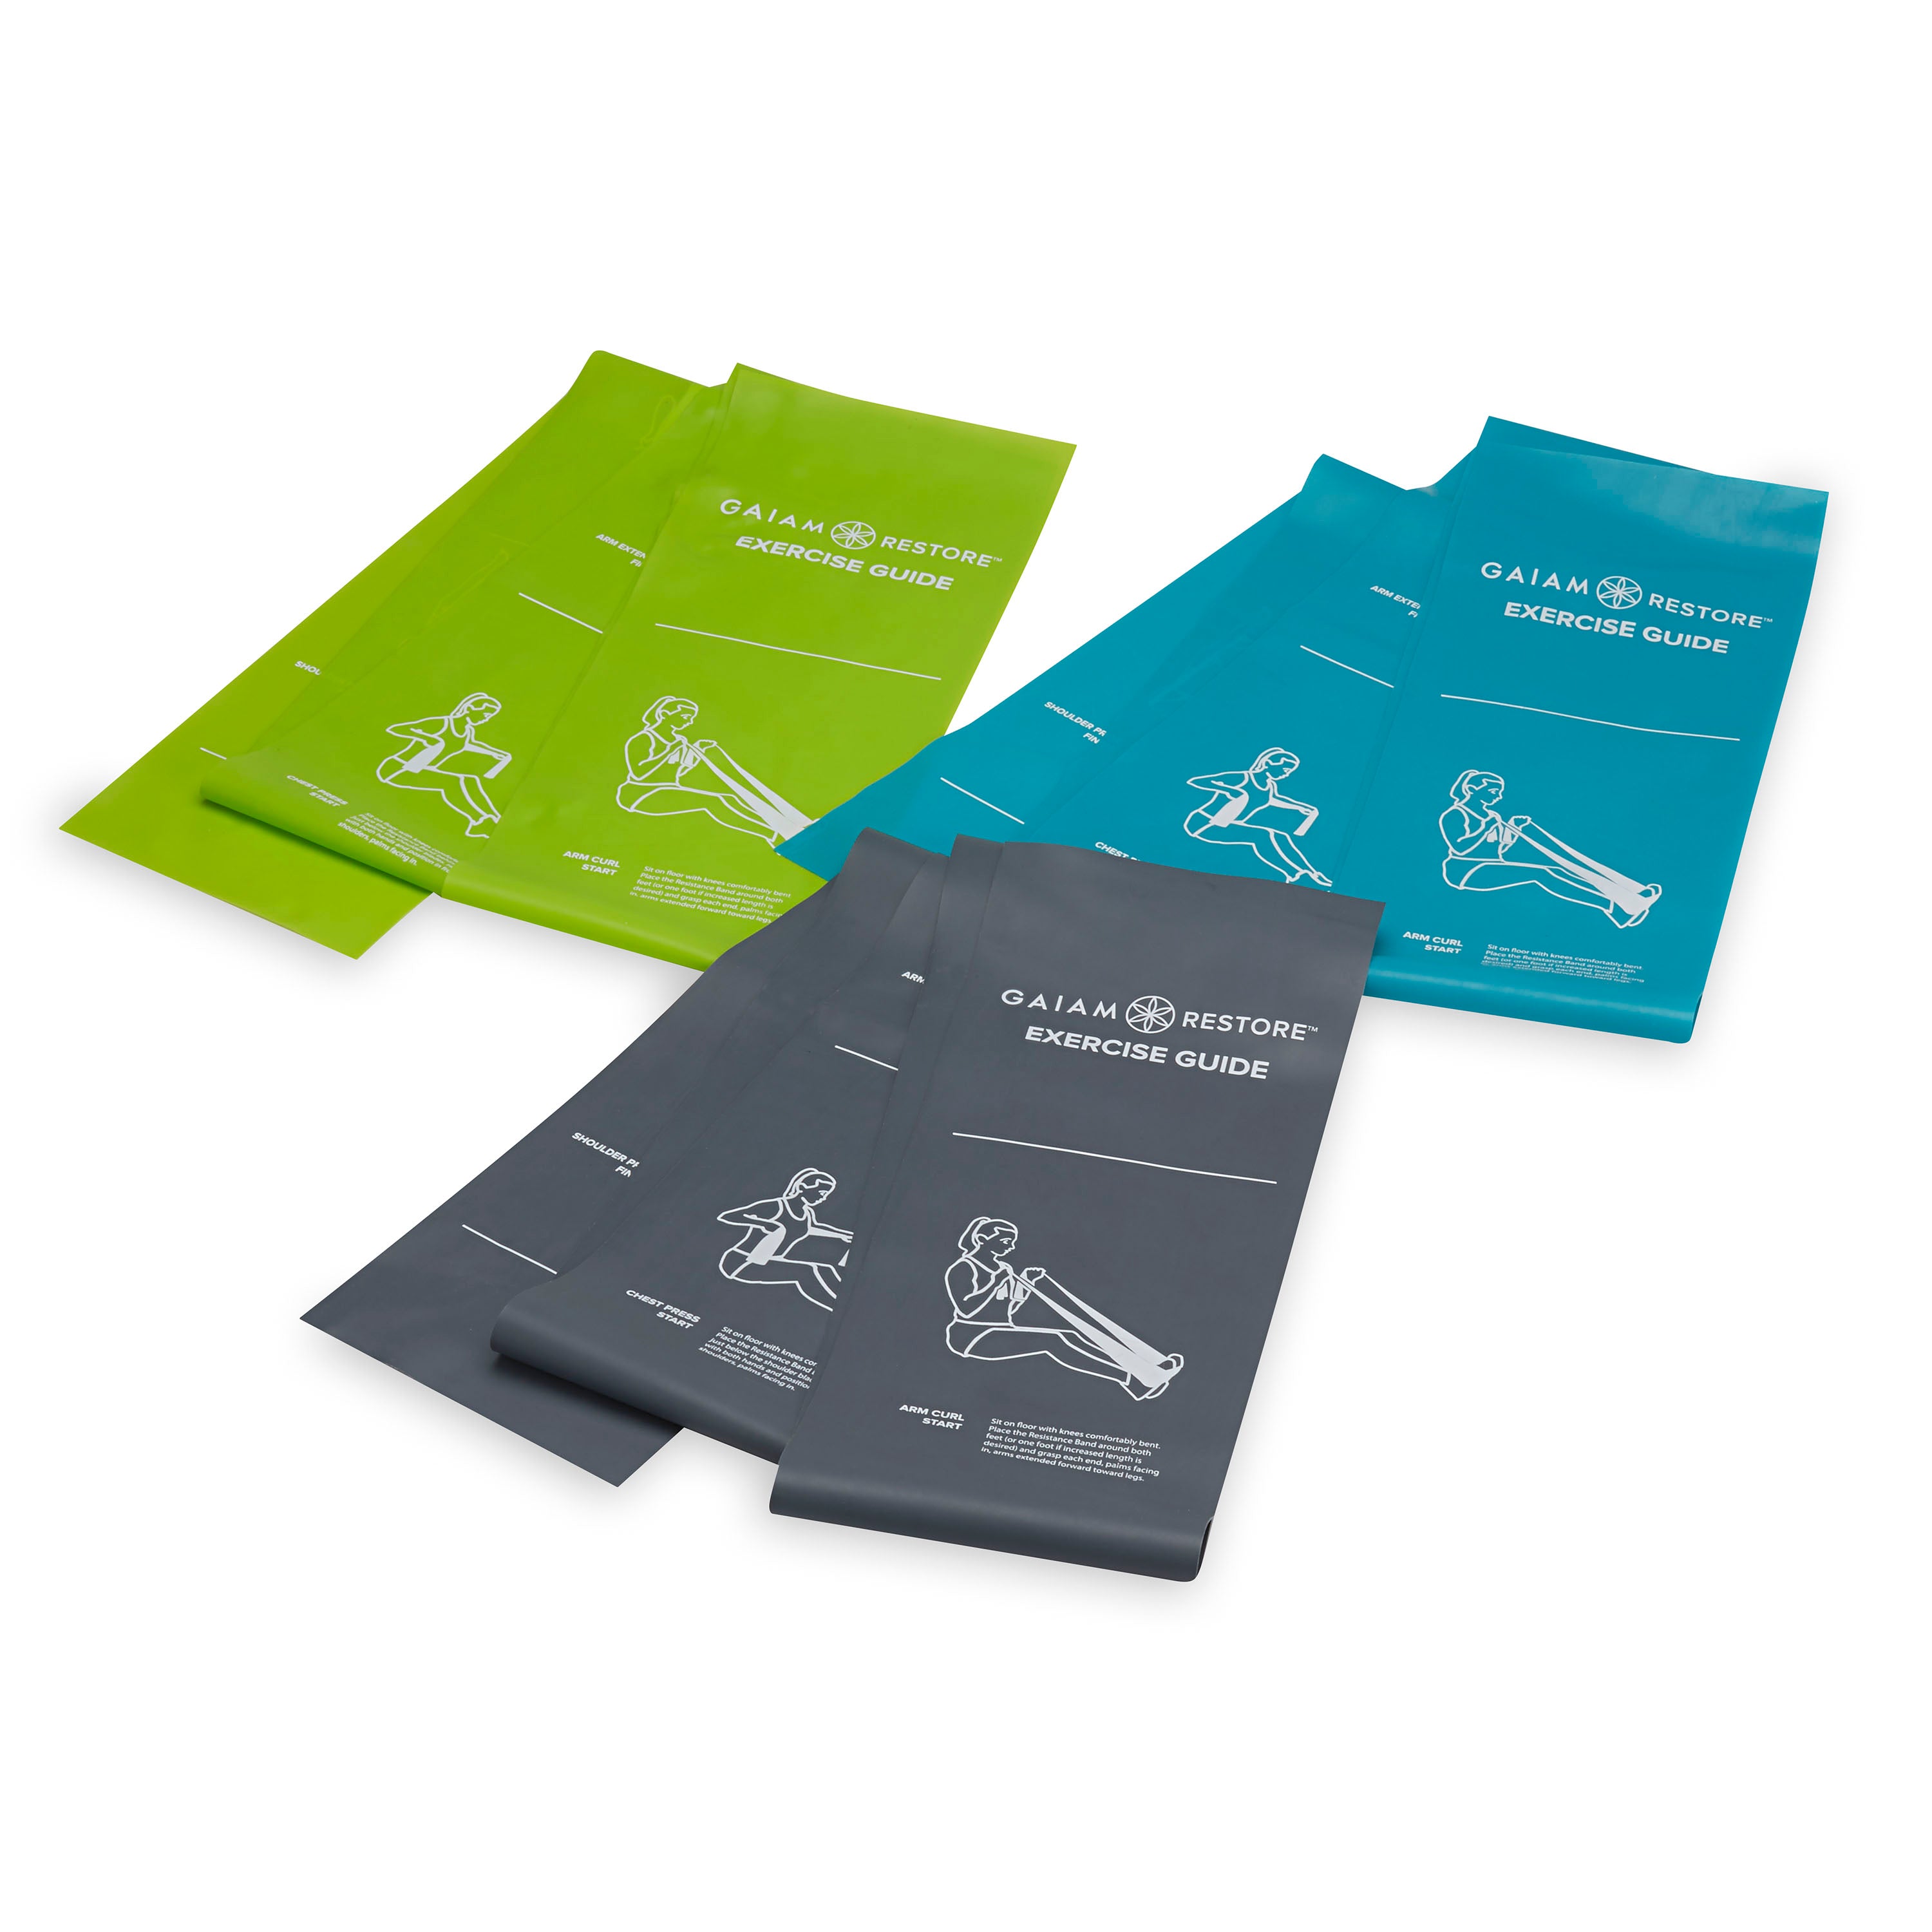 Gaiam Restore Self-Guided Strength & Flexibility Kit 3 bands